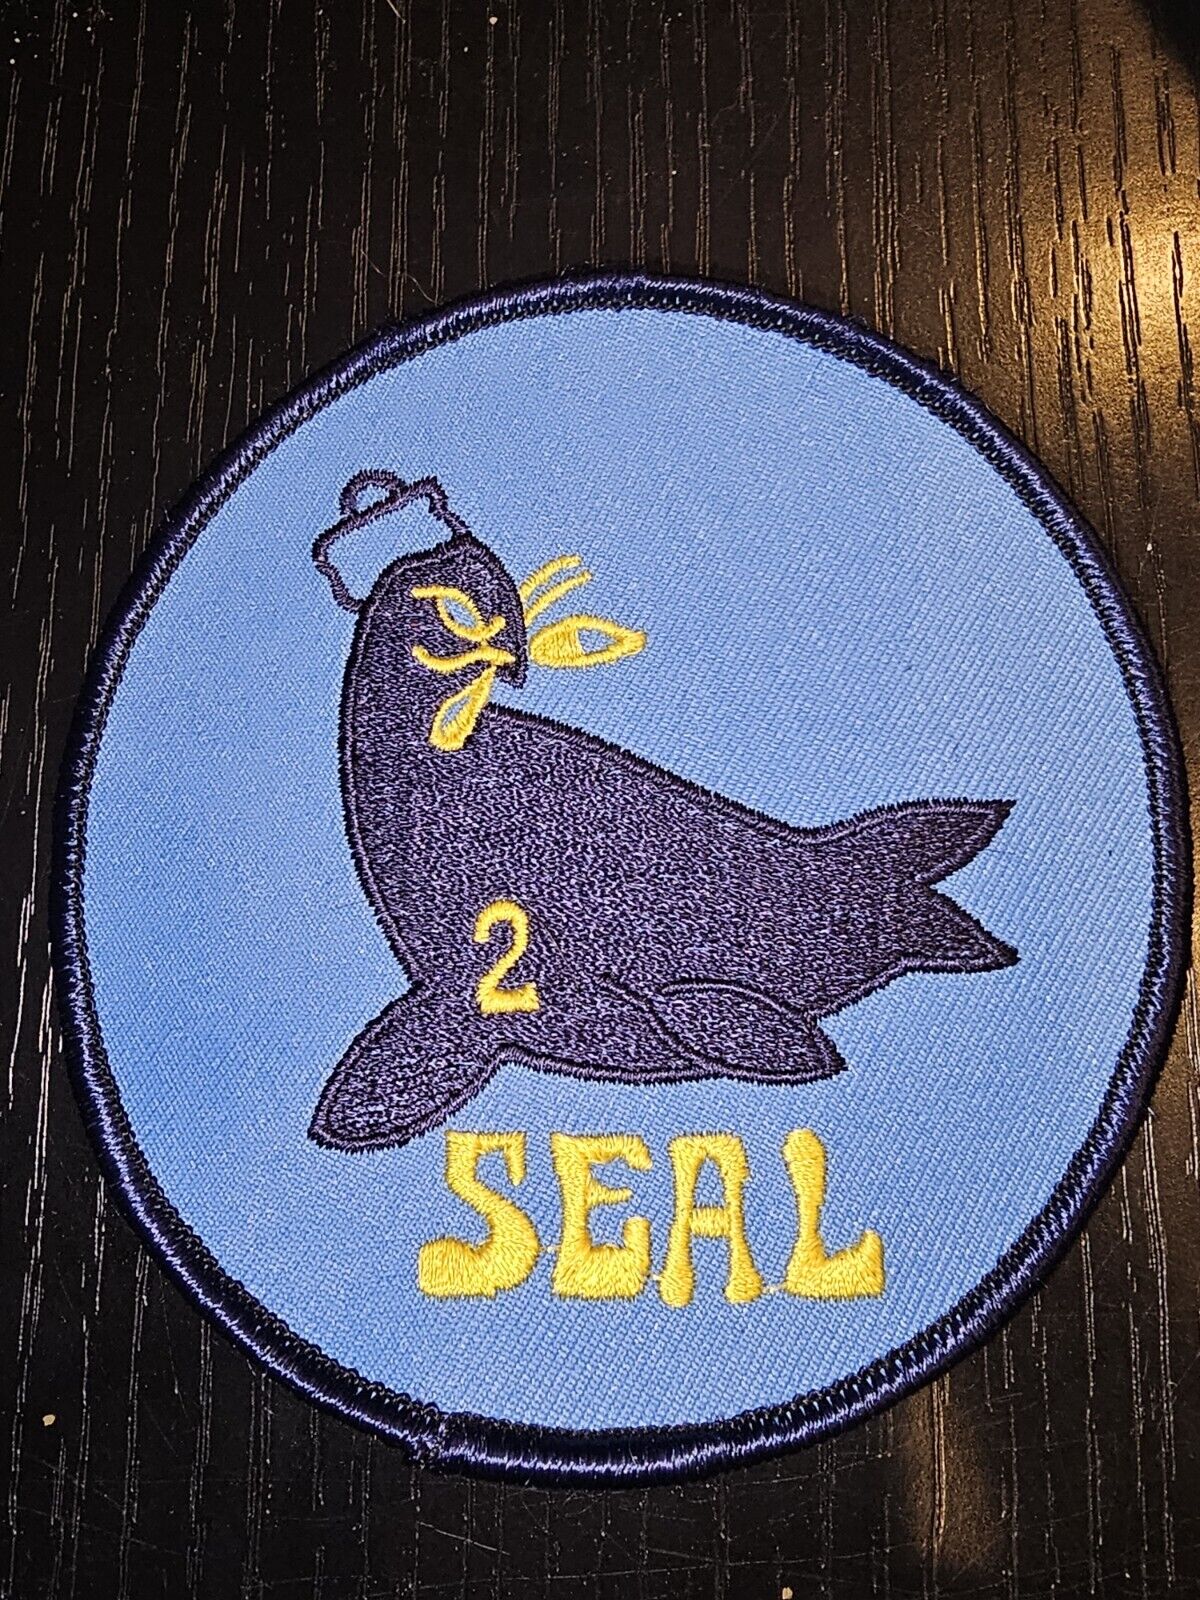 1960s 70s USN Navy Naval SEAL Team 2 Command Patch L@@K